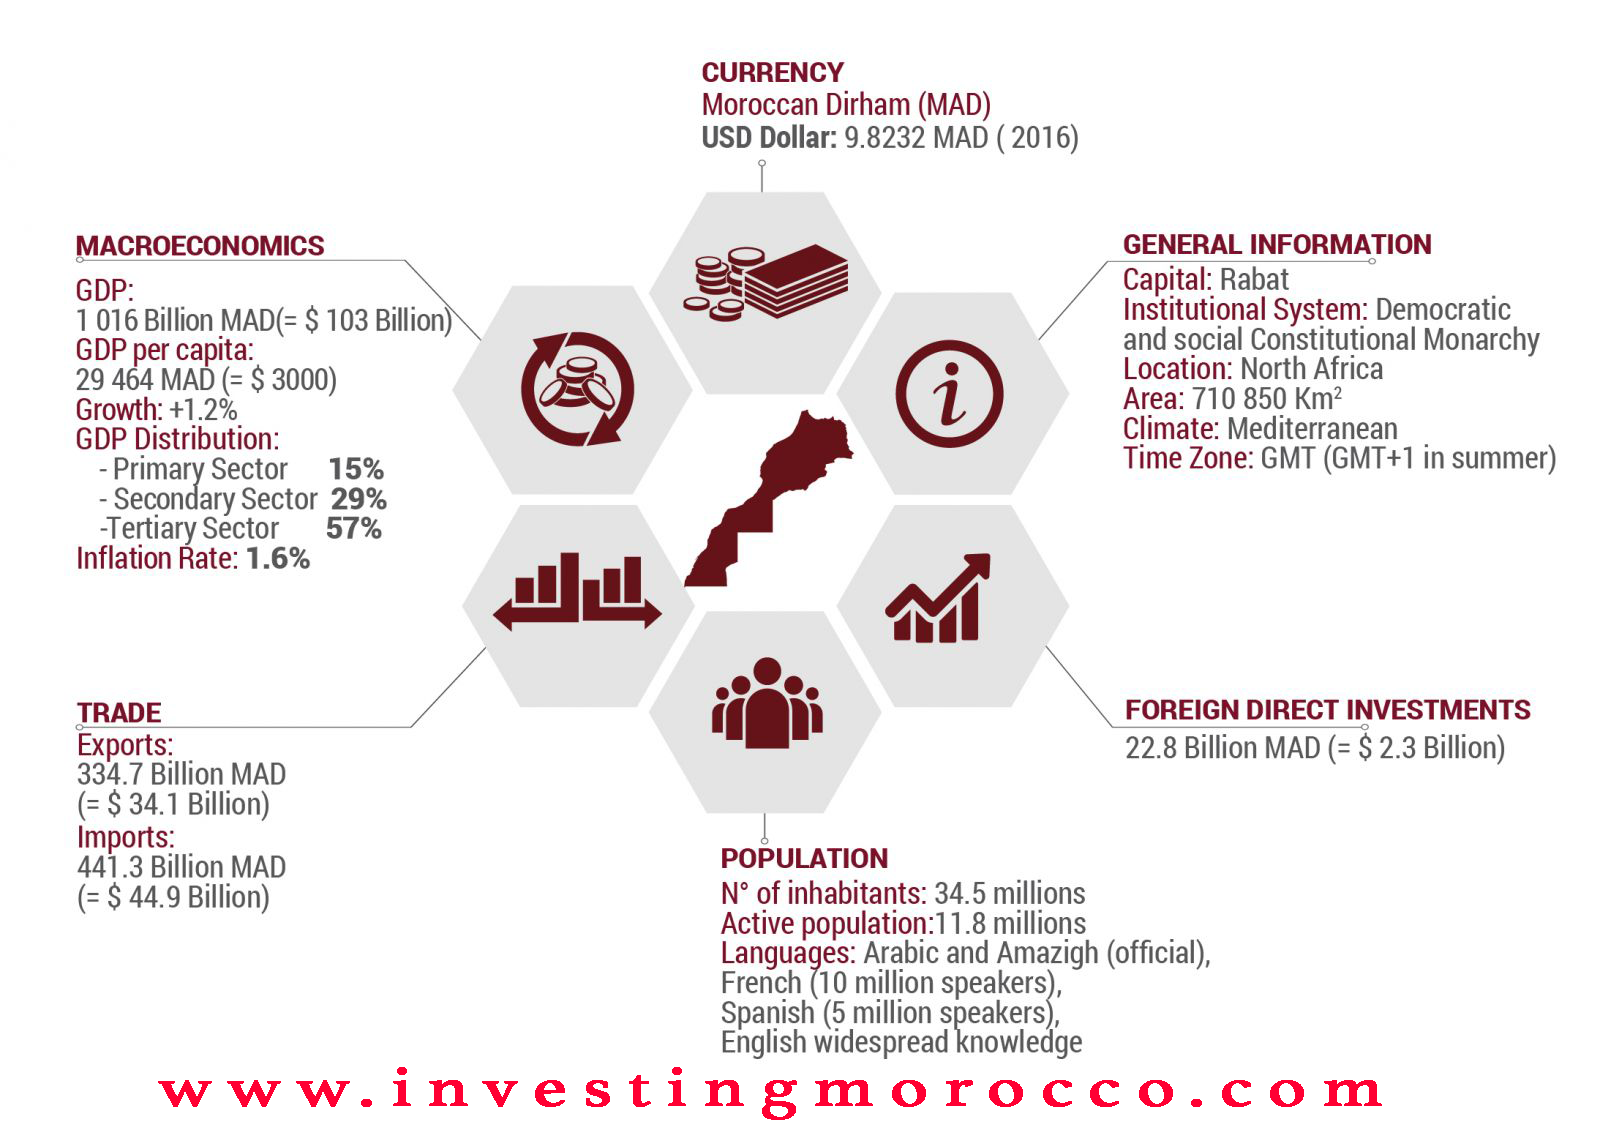 Top 7 reasons for investing in Morocco, investing in Morocco, Morocco investments, Morocco investments opportunities, invest in Morocco real estate, tourism in Morocco, hand crafts products in Morocco.... www.investingmorocco.com